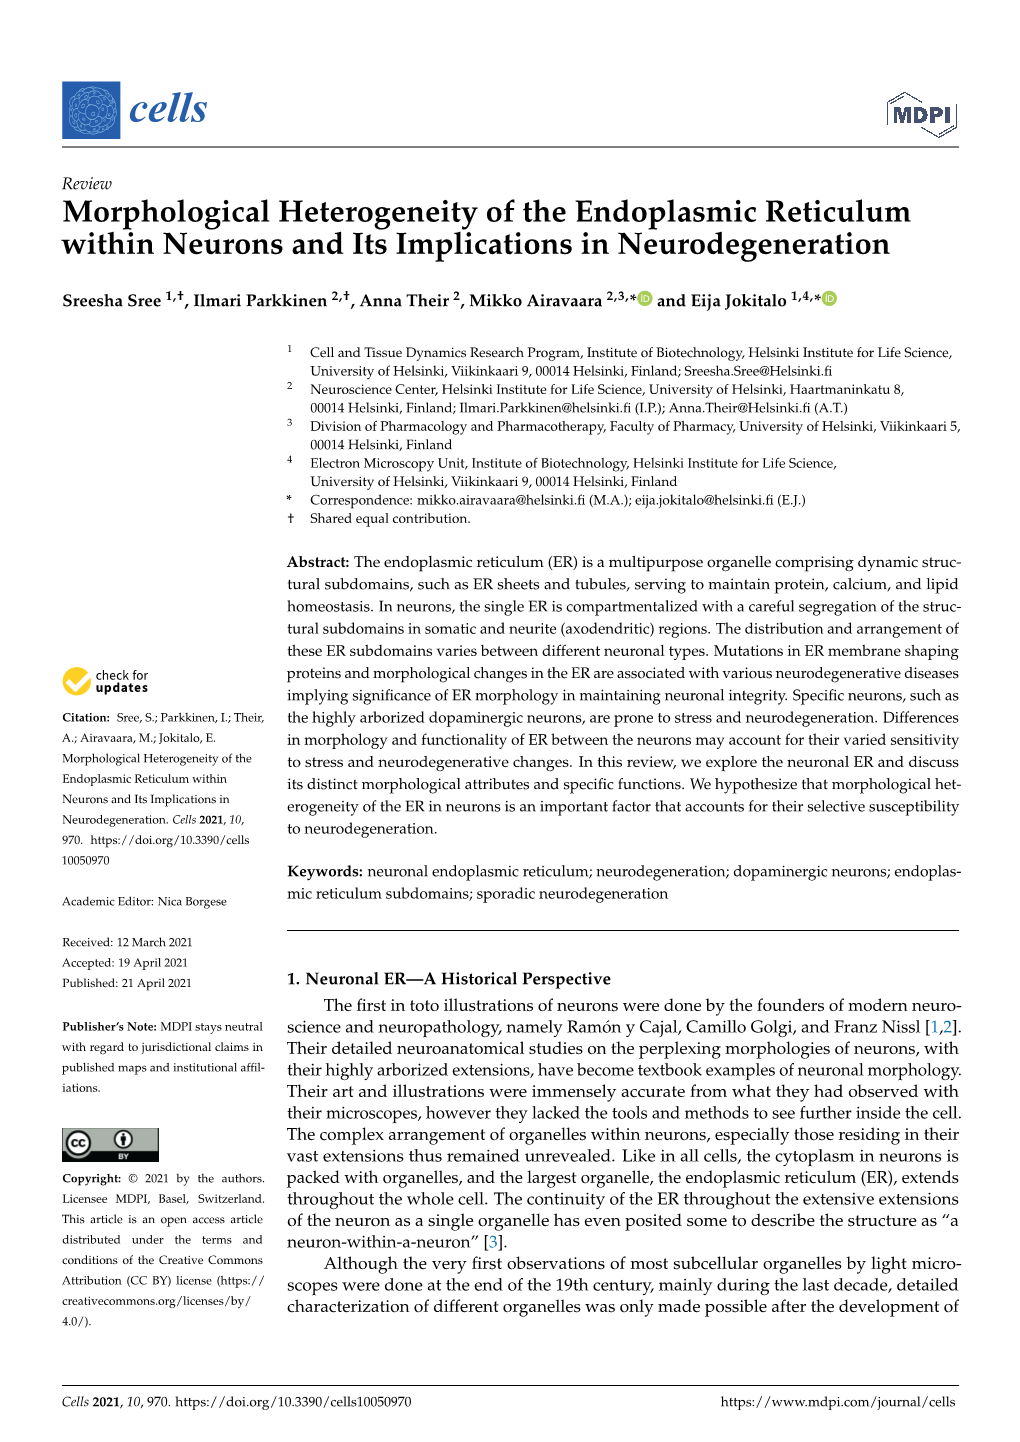 Morphological Heterogeneity of the Endoplasmic Reticulum Within Neurons and Its Implications in Neurodegeneration